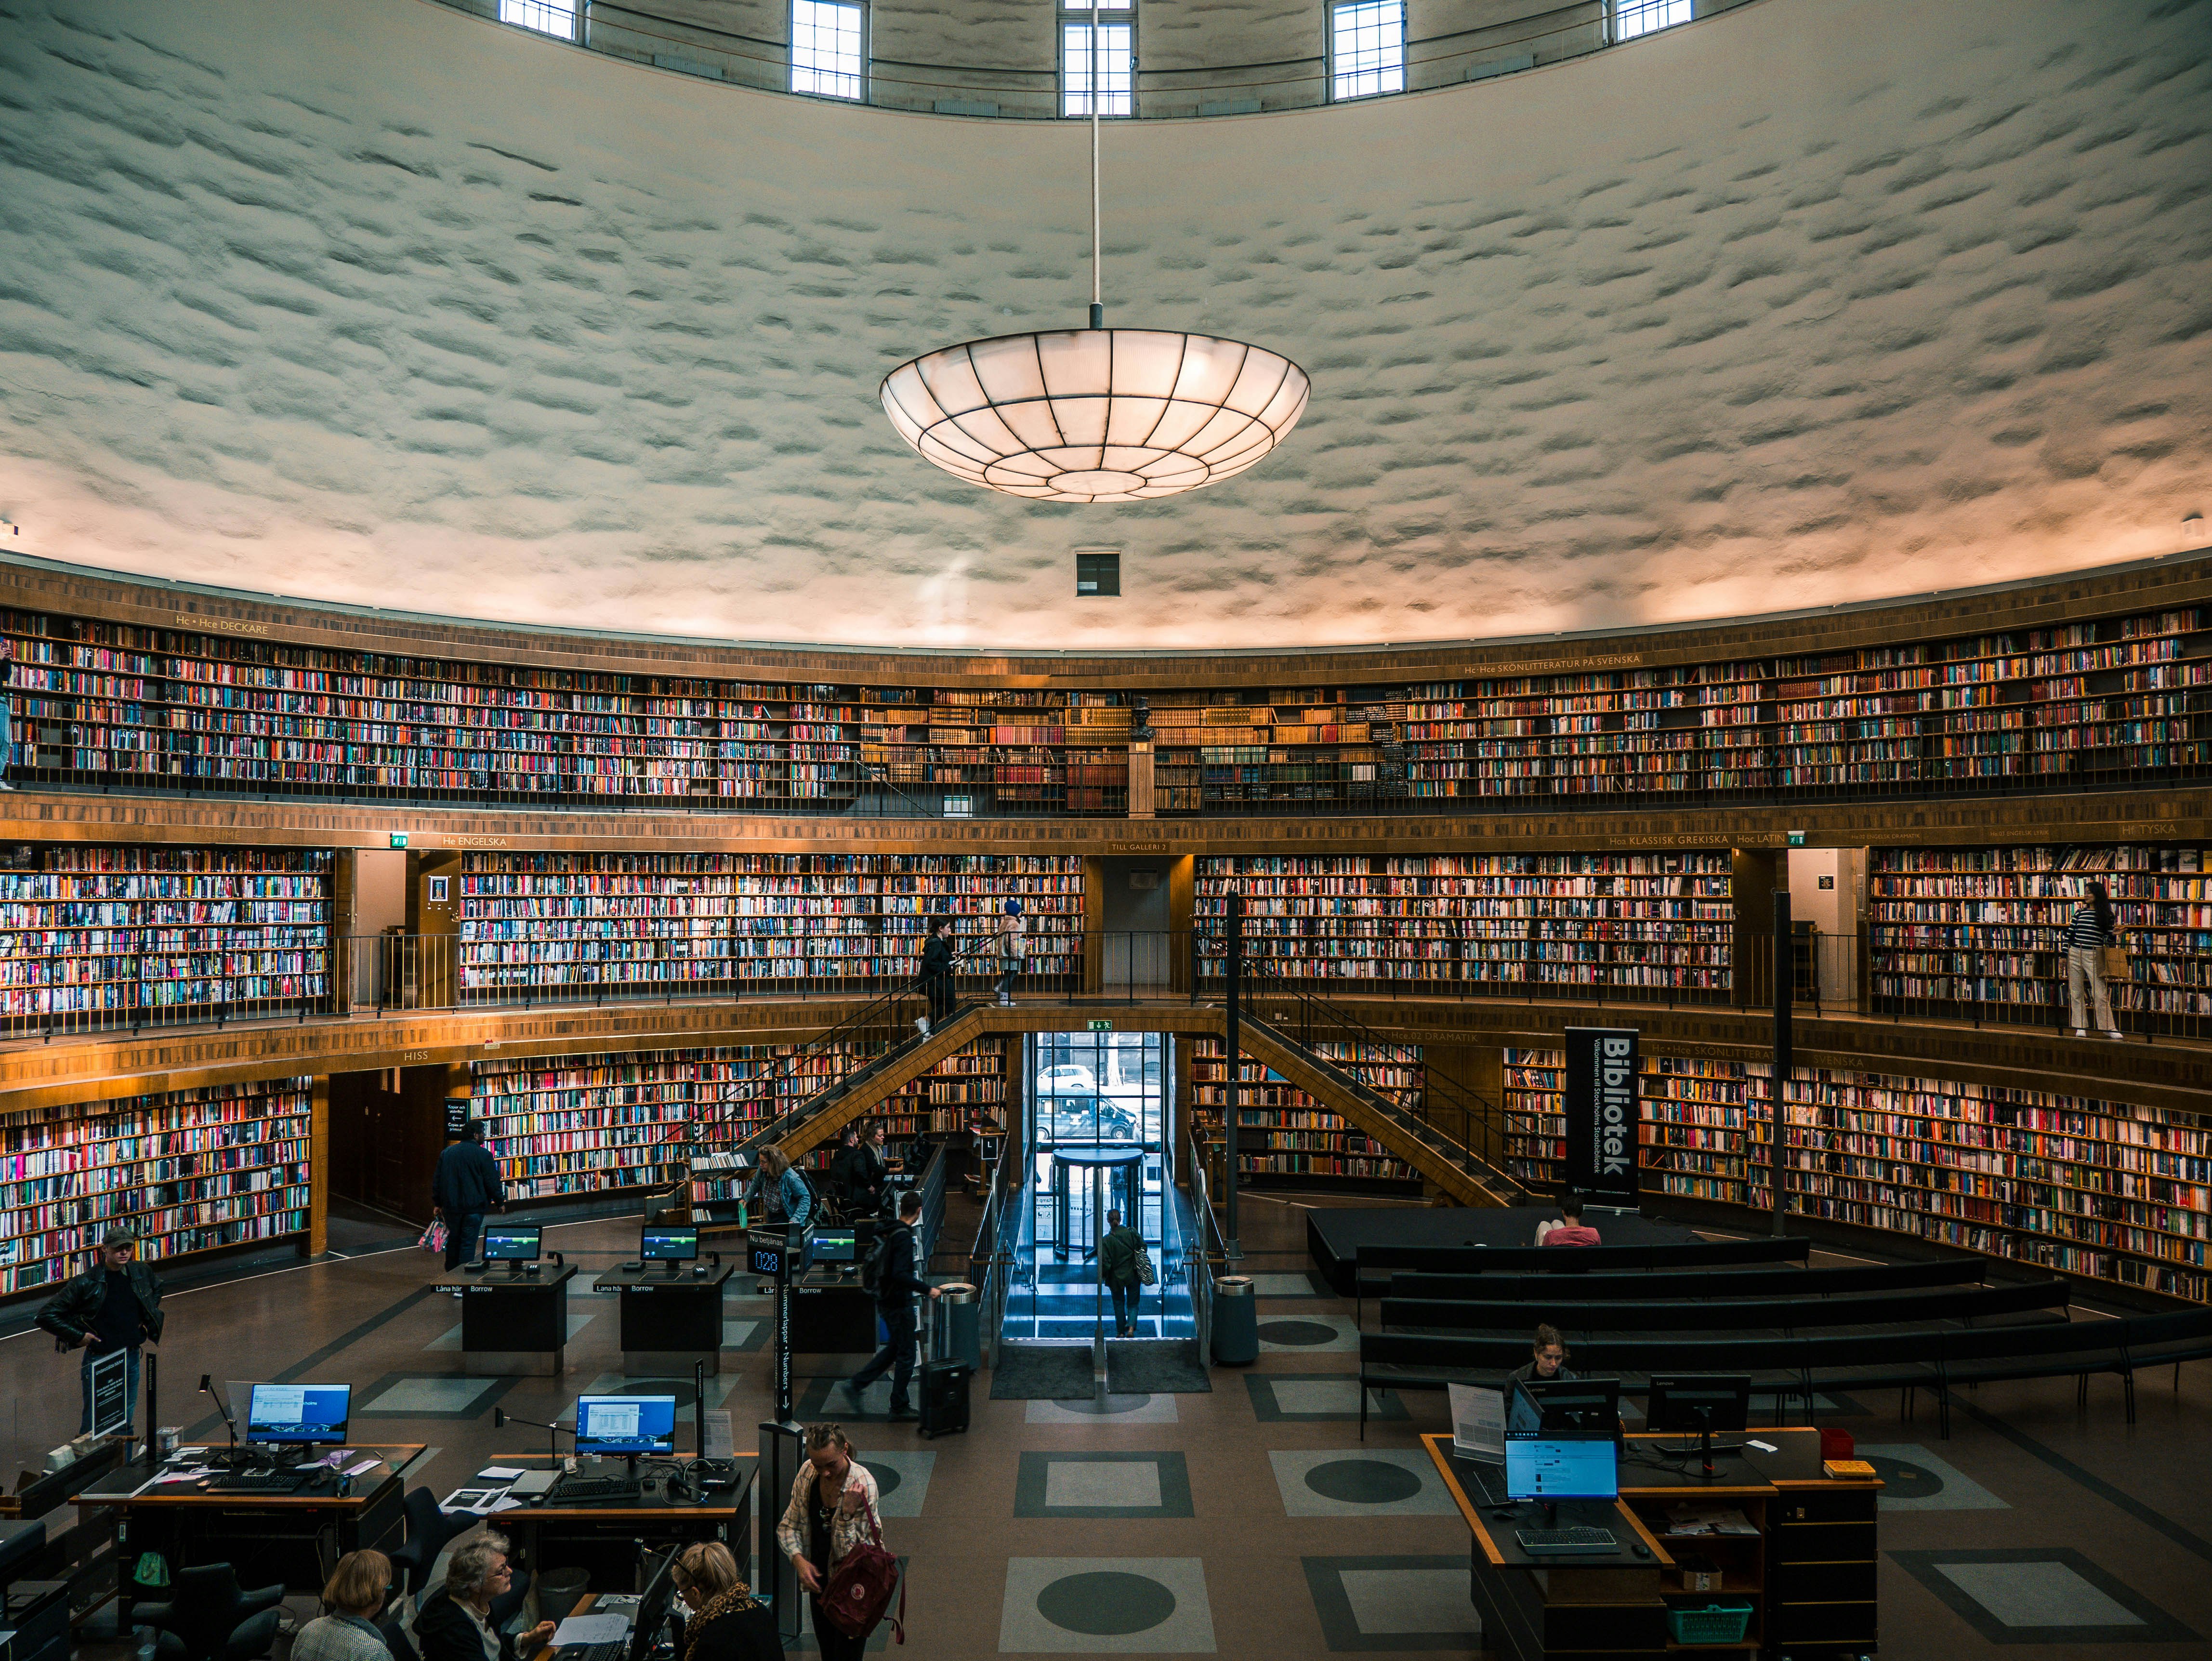 The interior of Stadsbiblioteket in Stockholm - Gunnar Asplunds library from 1928. The architecture is a transition between neoclassicism and functionalism.